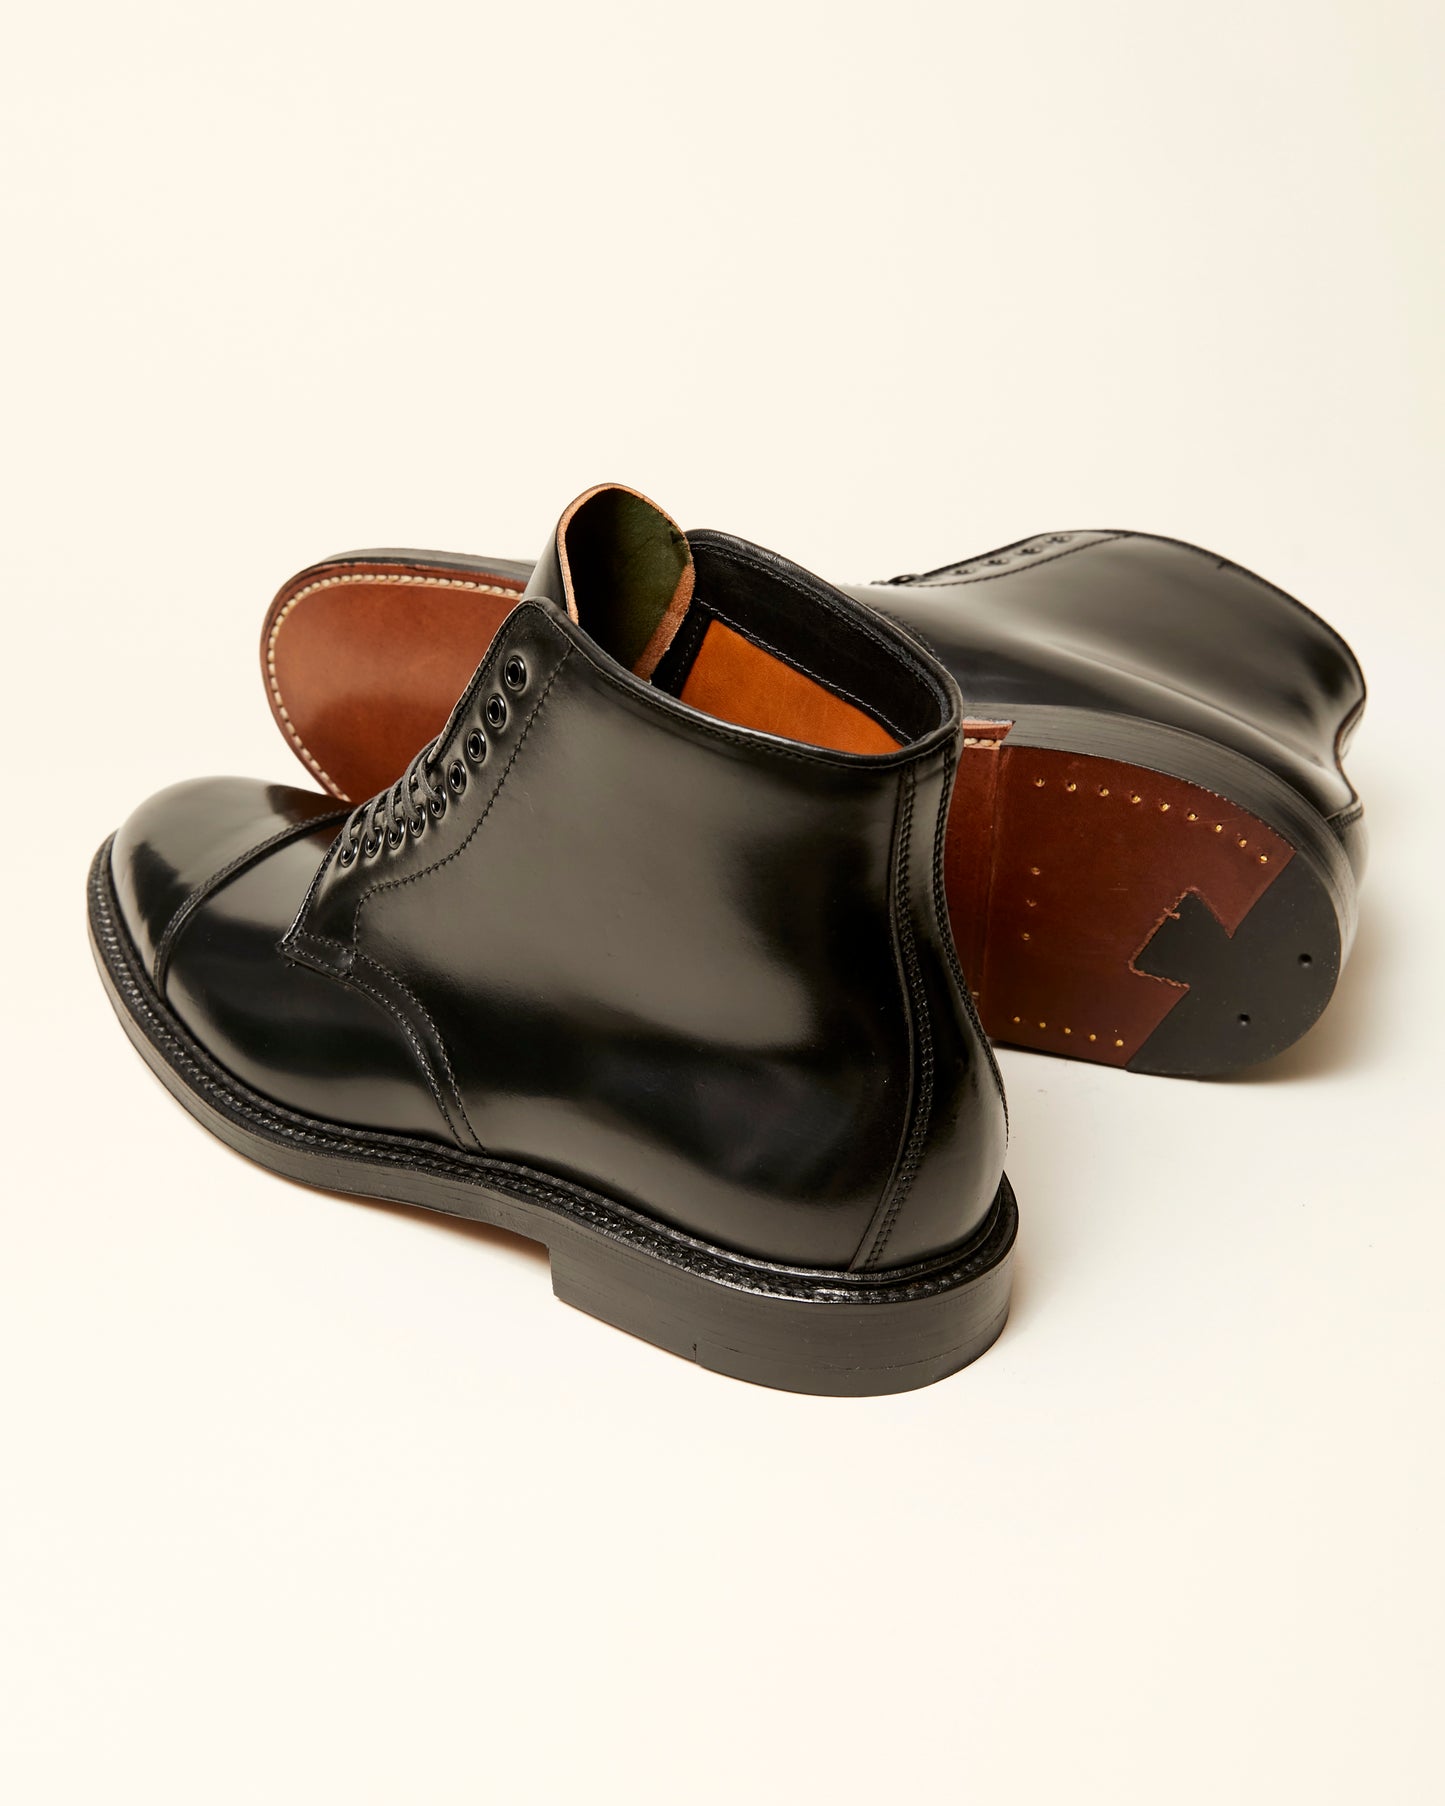 "Downtown" Straight Tip Boot in Black Shell Cordovan, Barrie Last